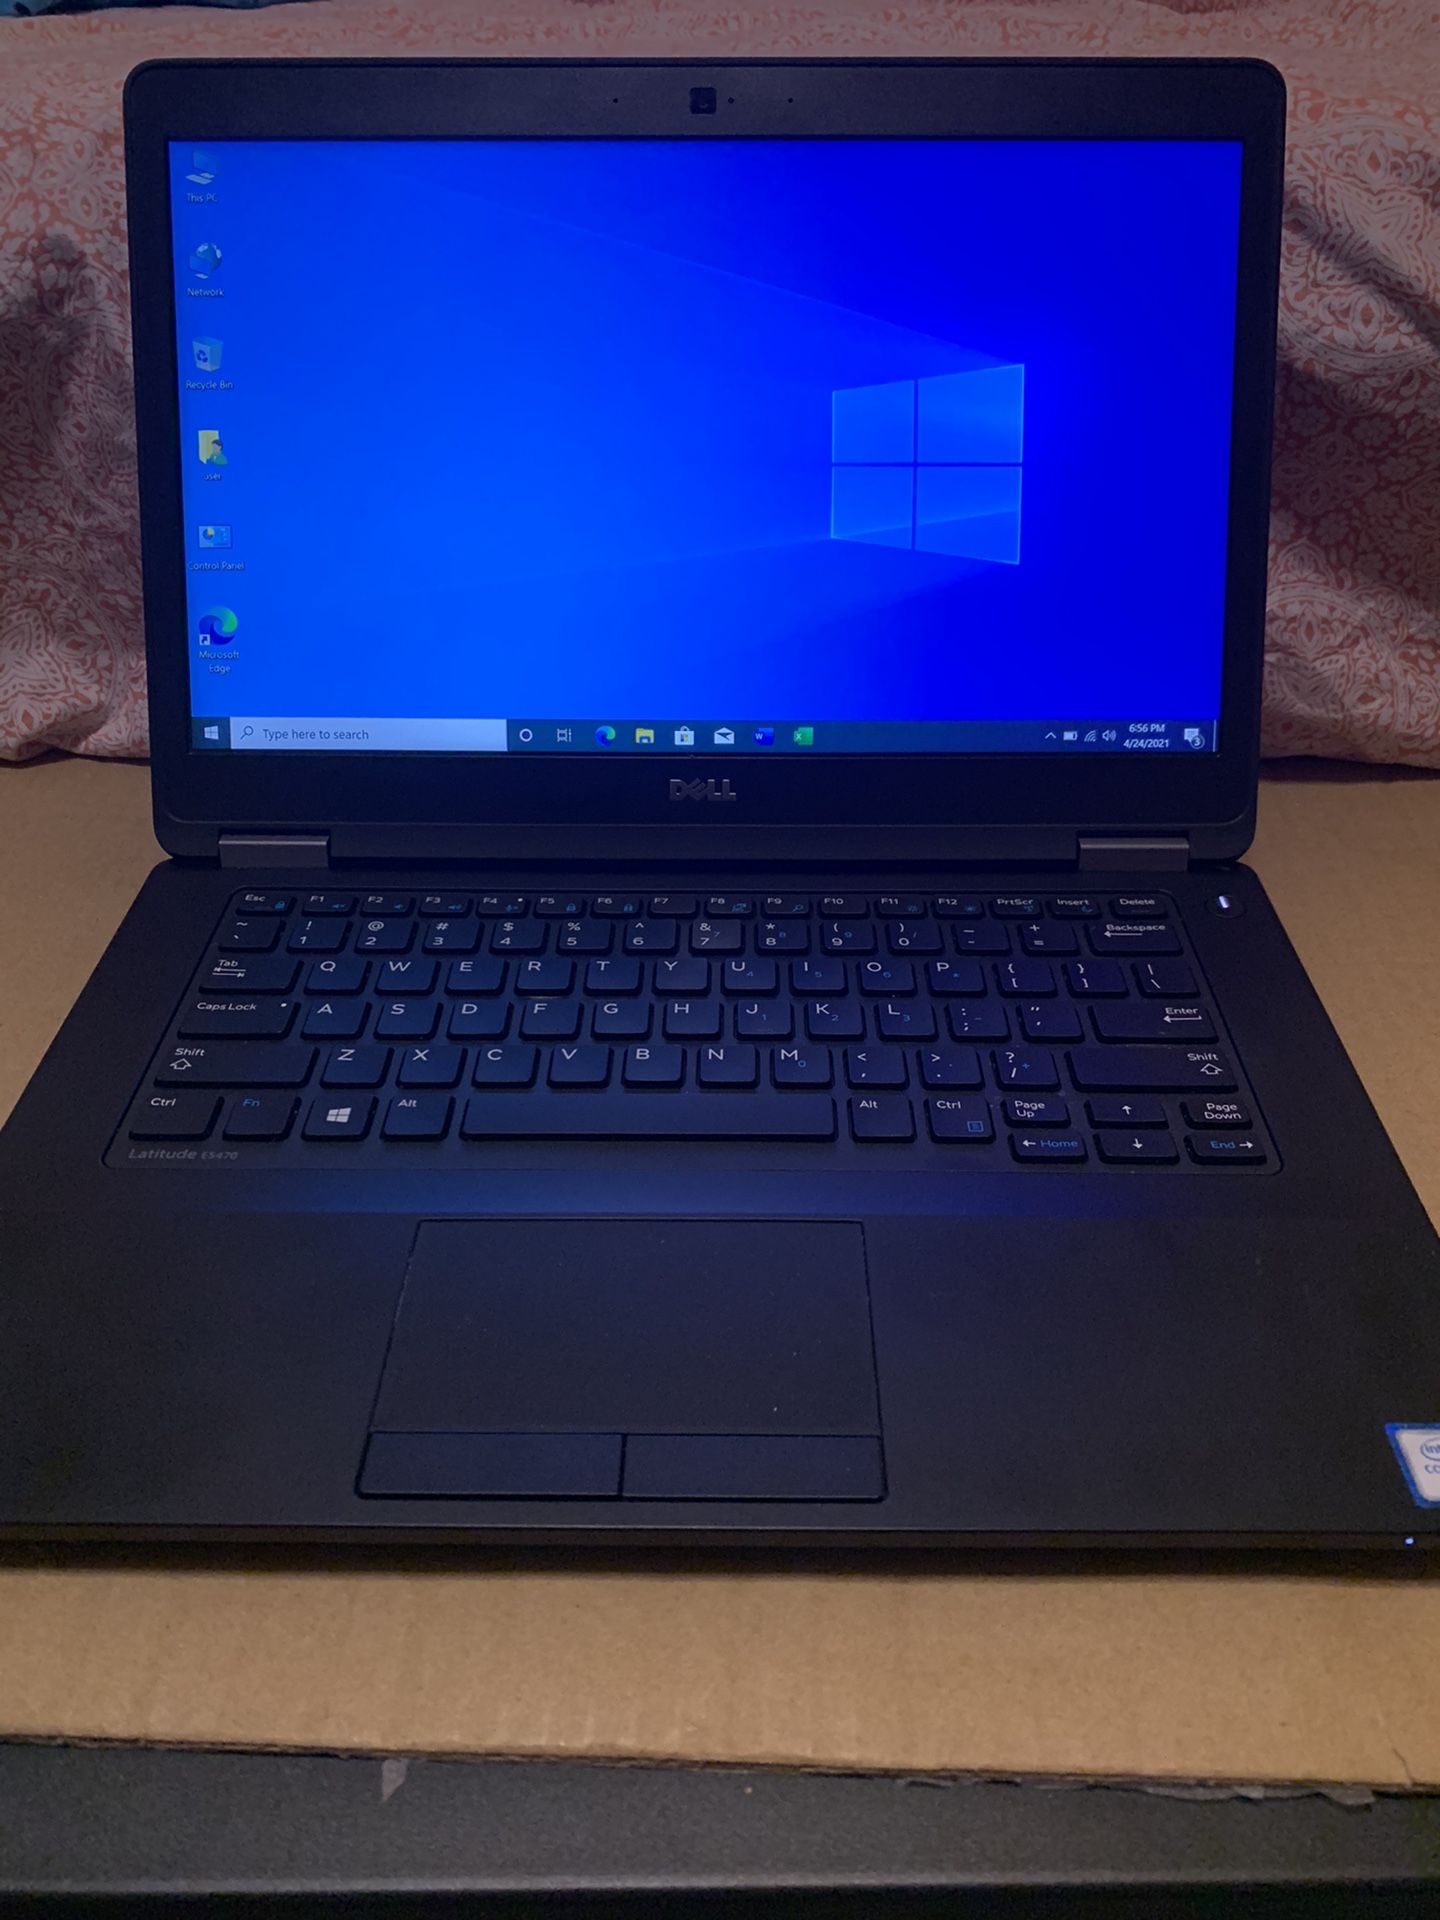 “DELL LATITUDE E5470” Powerful laptop Intel core (TM) i5-6300U CPU @ 2.40 GHzy 2.50 GHz ,8GB RAM,256 SSD with fully installed/ licensed Windows 10 an